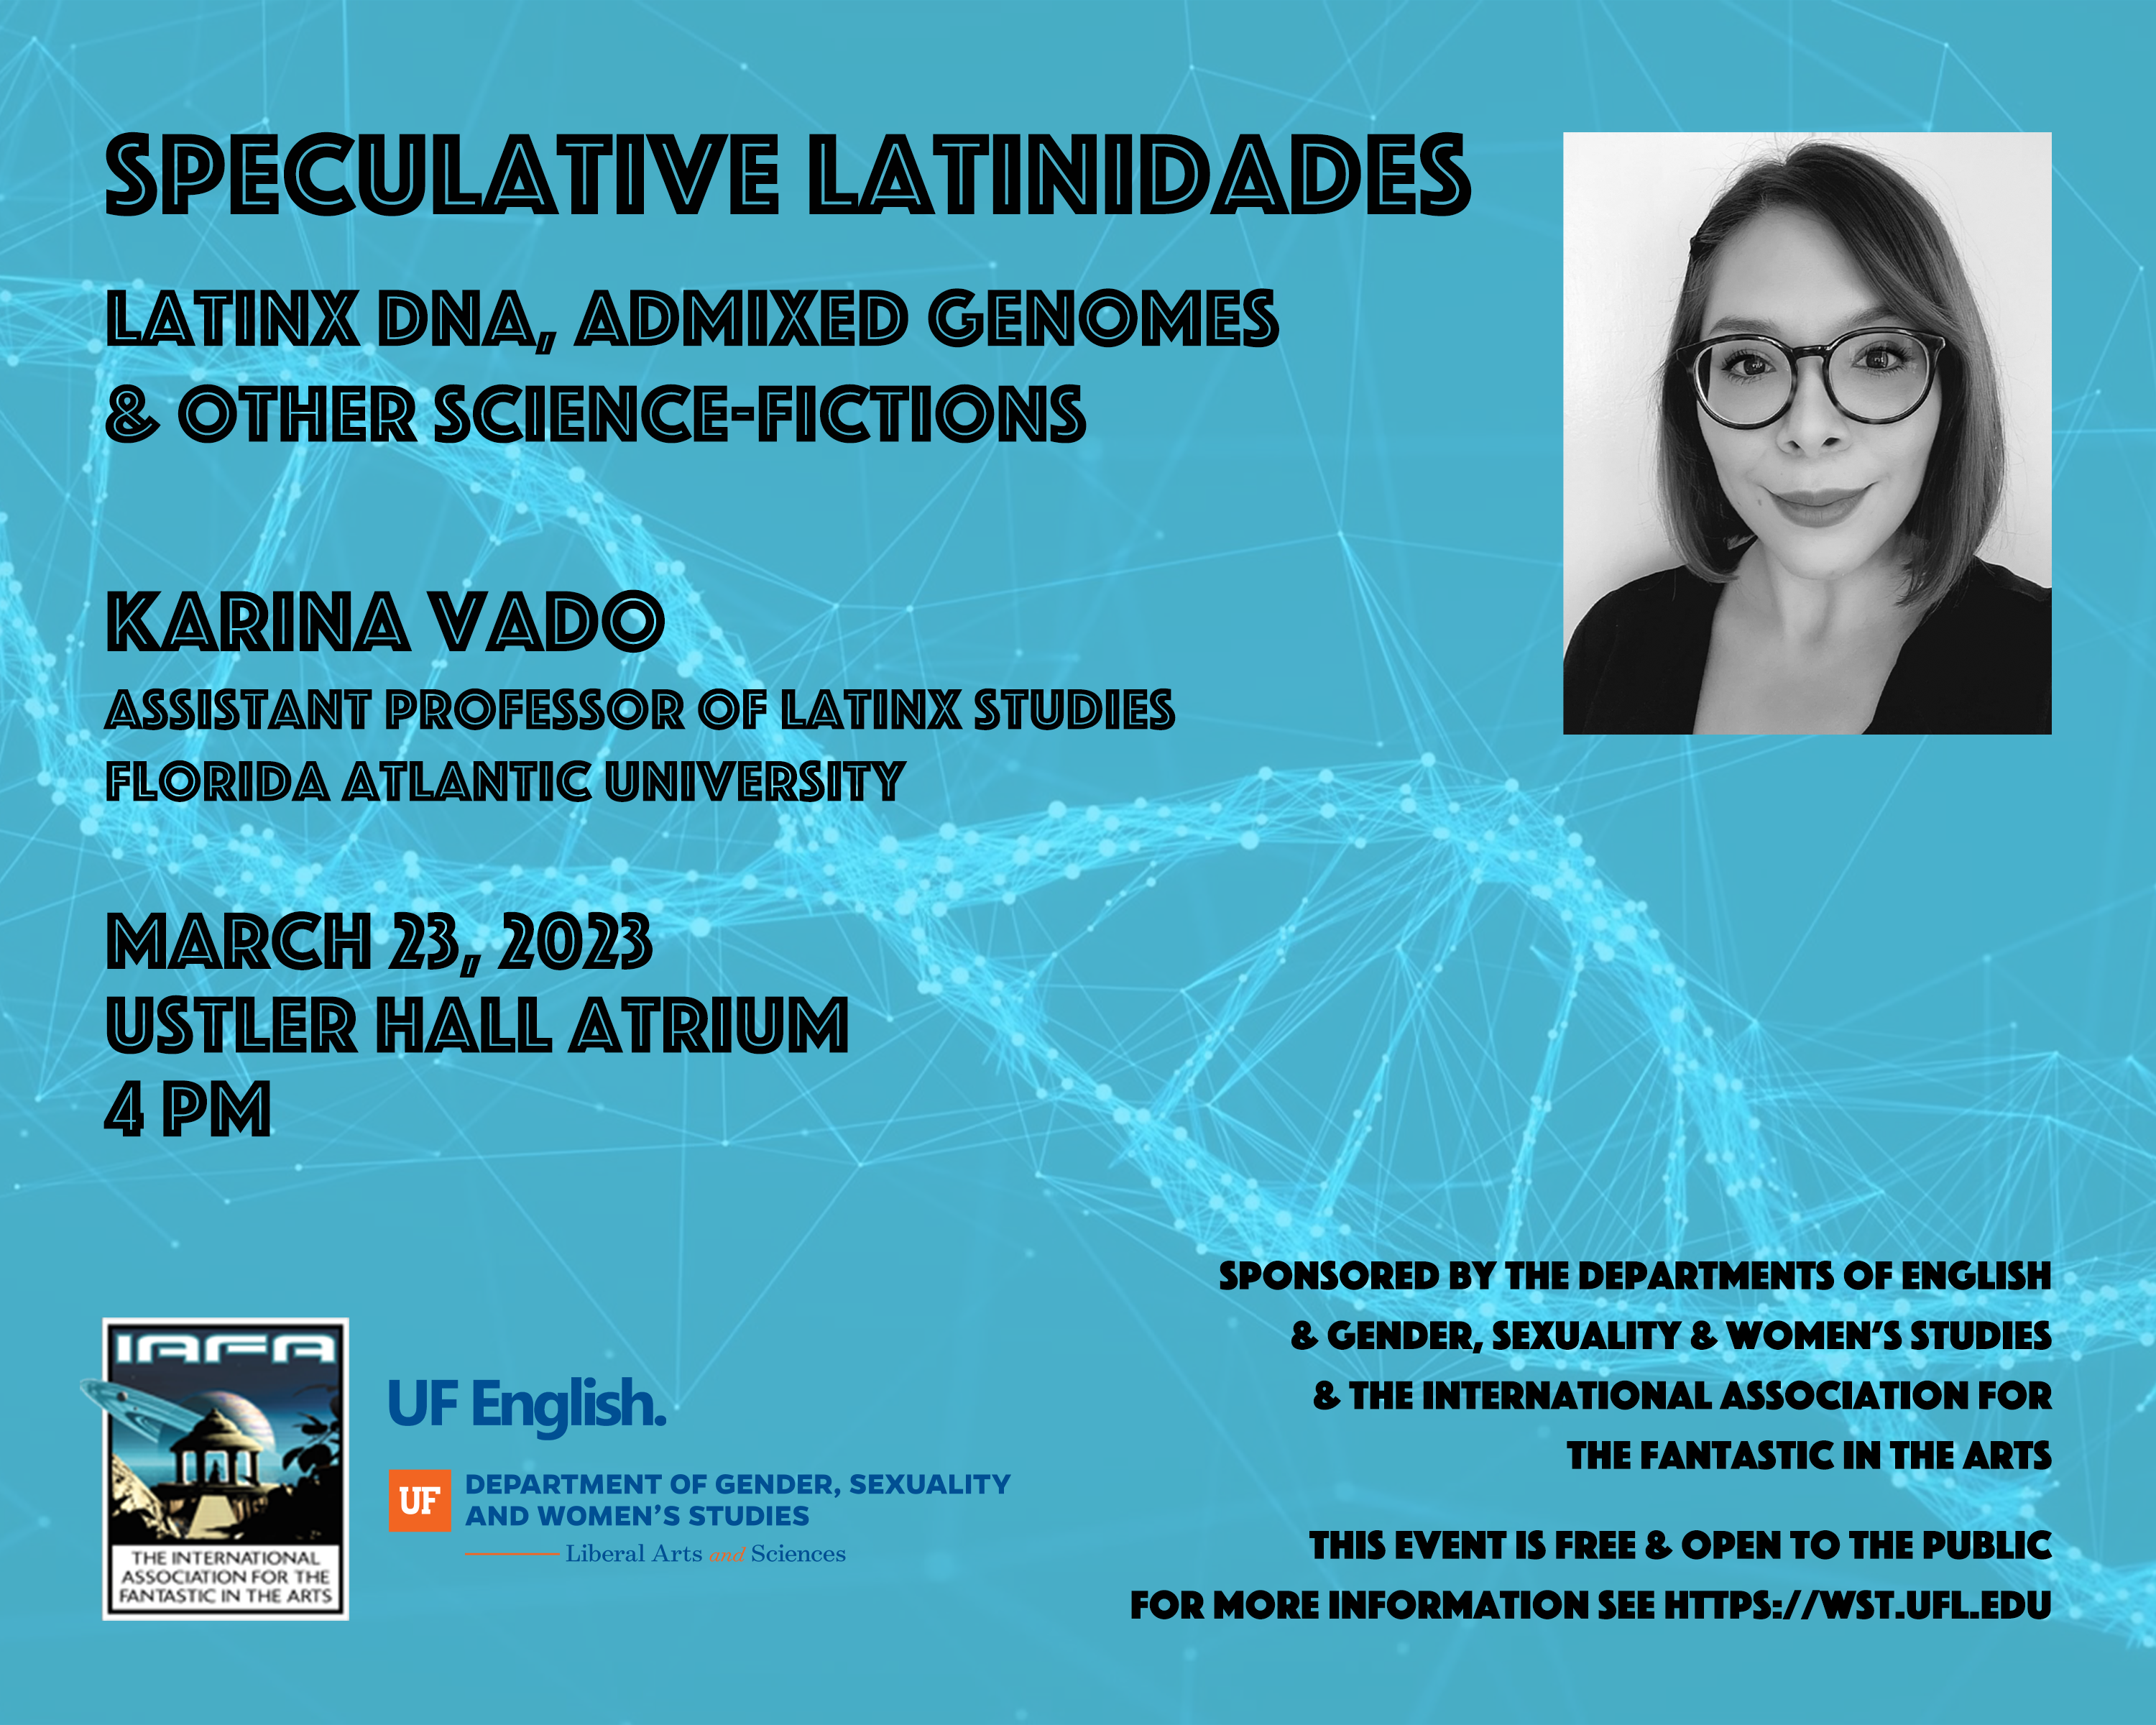 A poster for the Speculative Latinidades conference event on March, 23, 2023. There is a black and white headshot of Dr. Karina Vado, the event speaker, in the upper-right corner. Text on the poster reads: "Speculative Latinidades: Latinx DNA, Admixed Genomes, & Other Science Fictions. Karina Vado, assistant professor of Latinx Studies, Florida Atlantic University. March 23, 2023, Ustler Hall Atrium, 4pm."